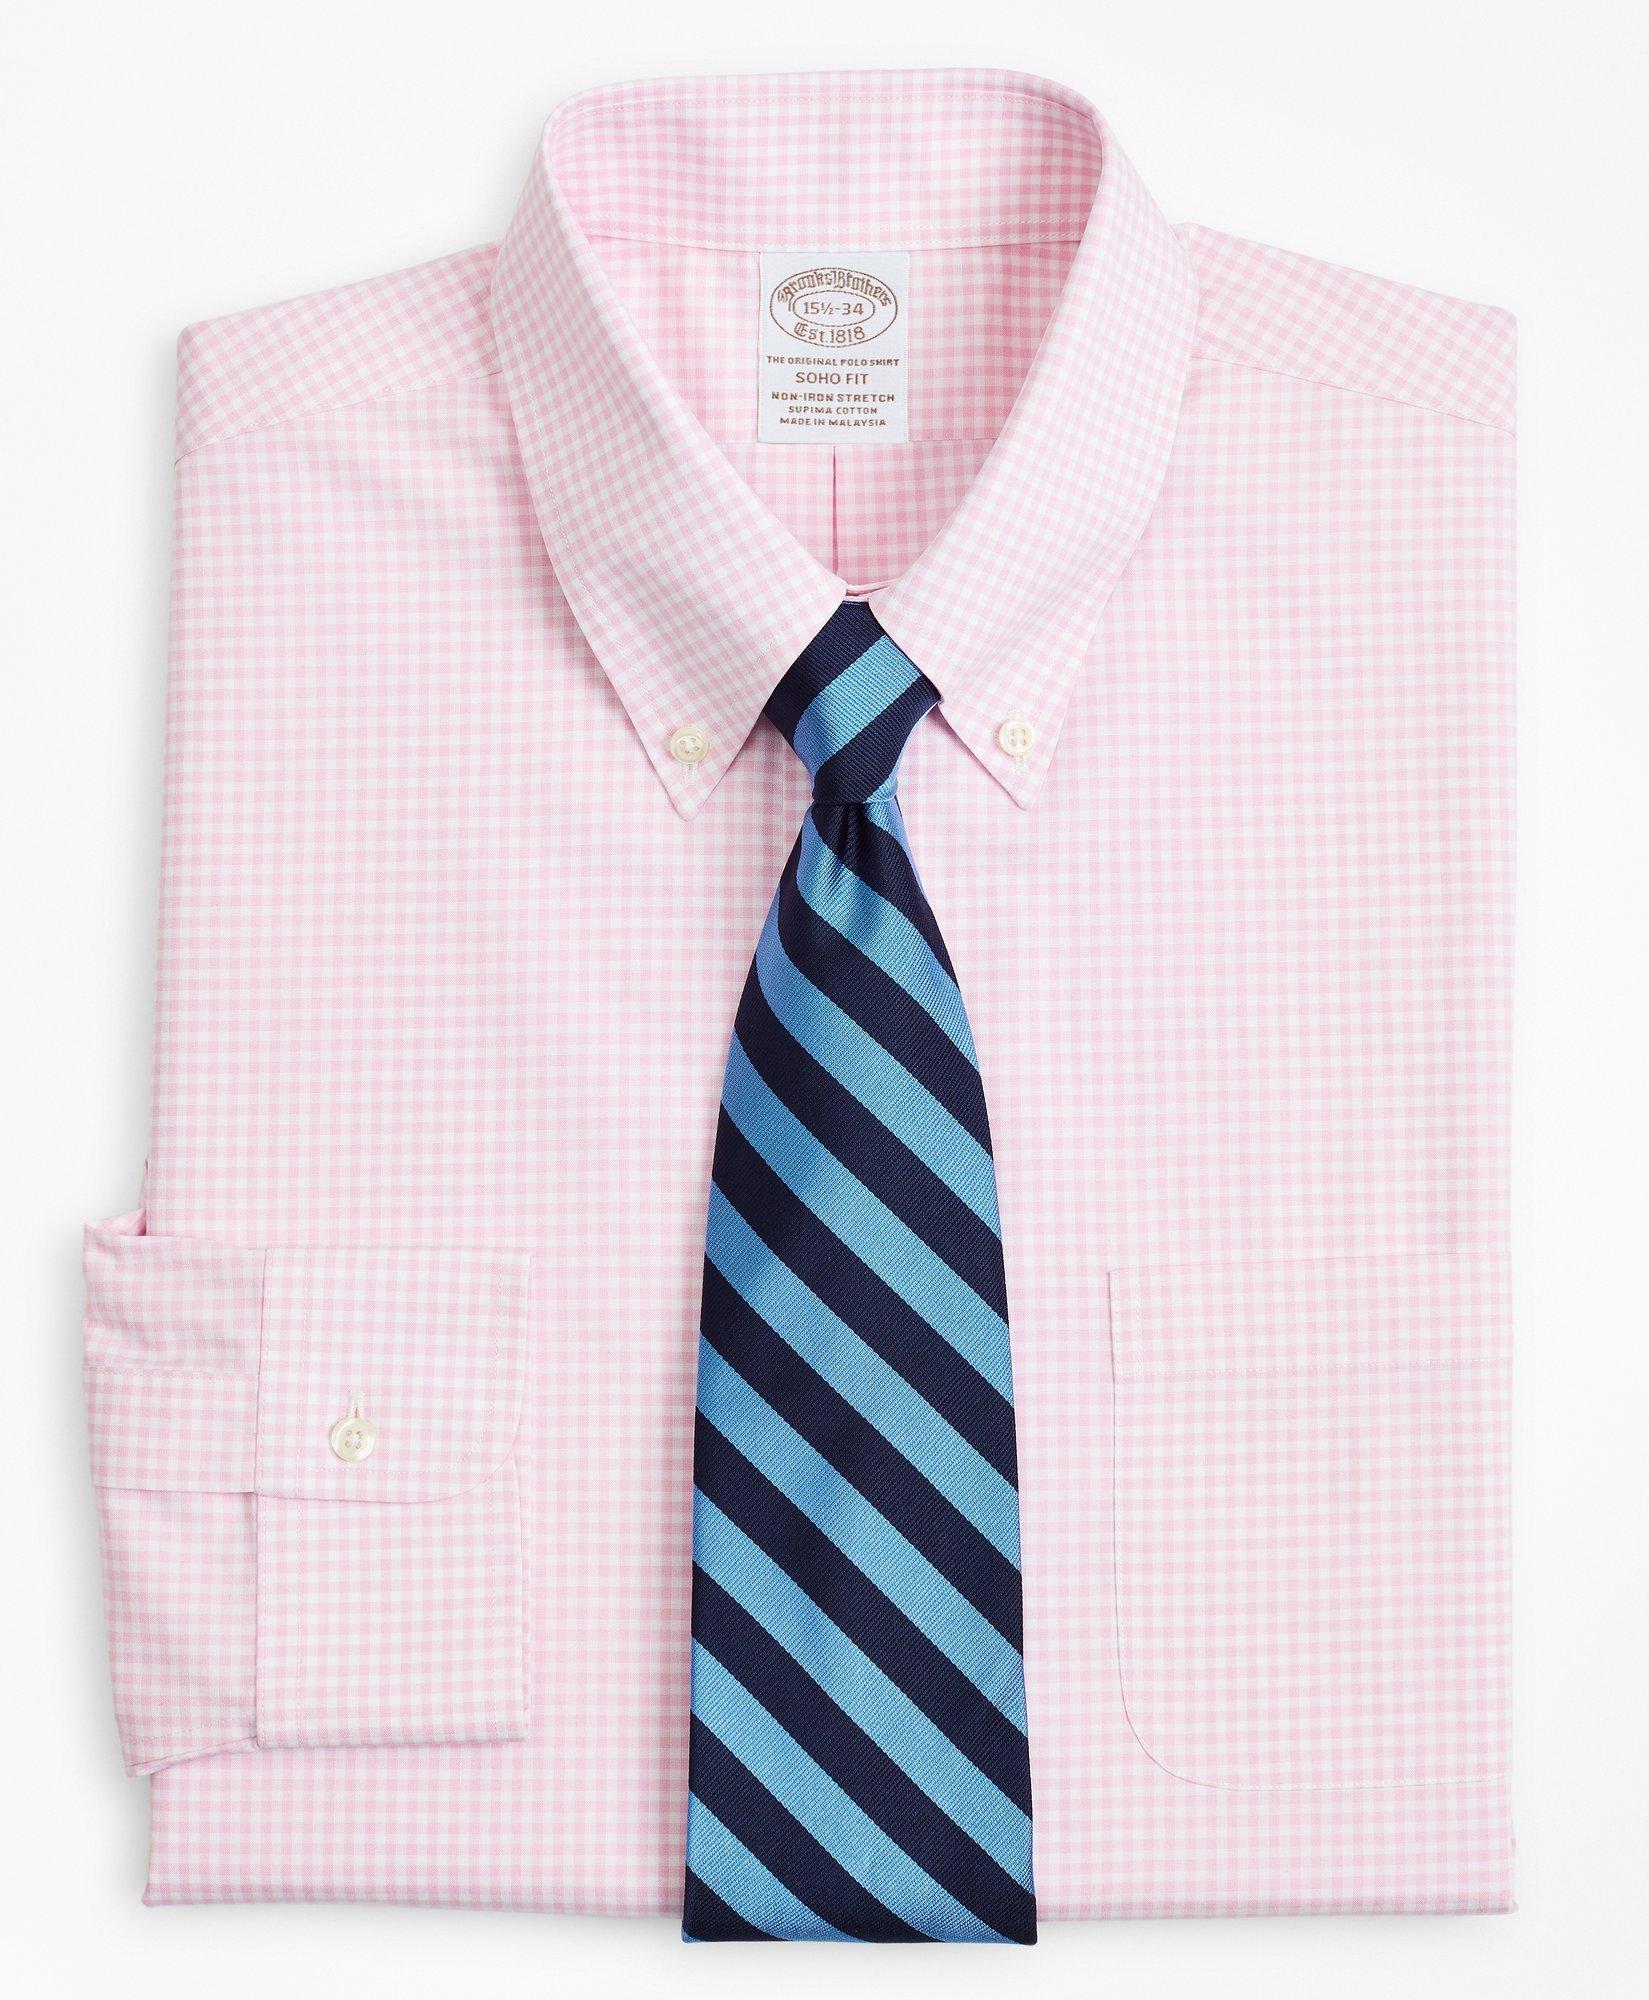 Brooks Brothers Stretch Soho Extra-slim-fit Dress Shirt, Non-iron Poplin Button-down Collar Gingham | Pink | Size 17